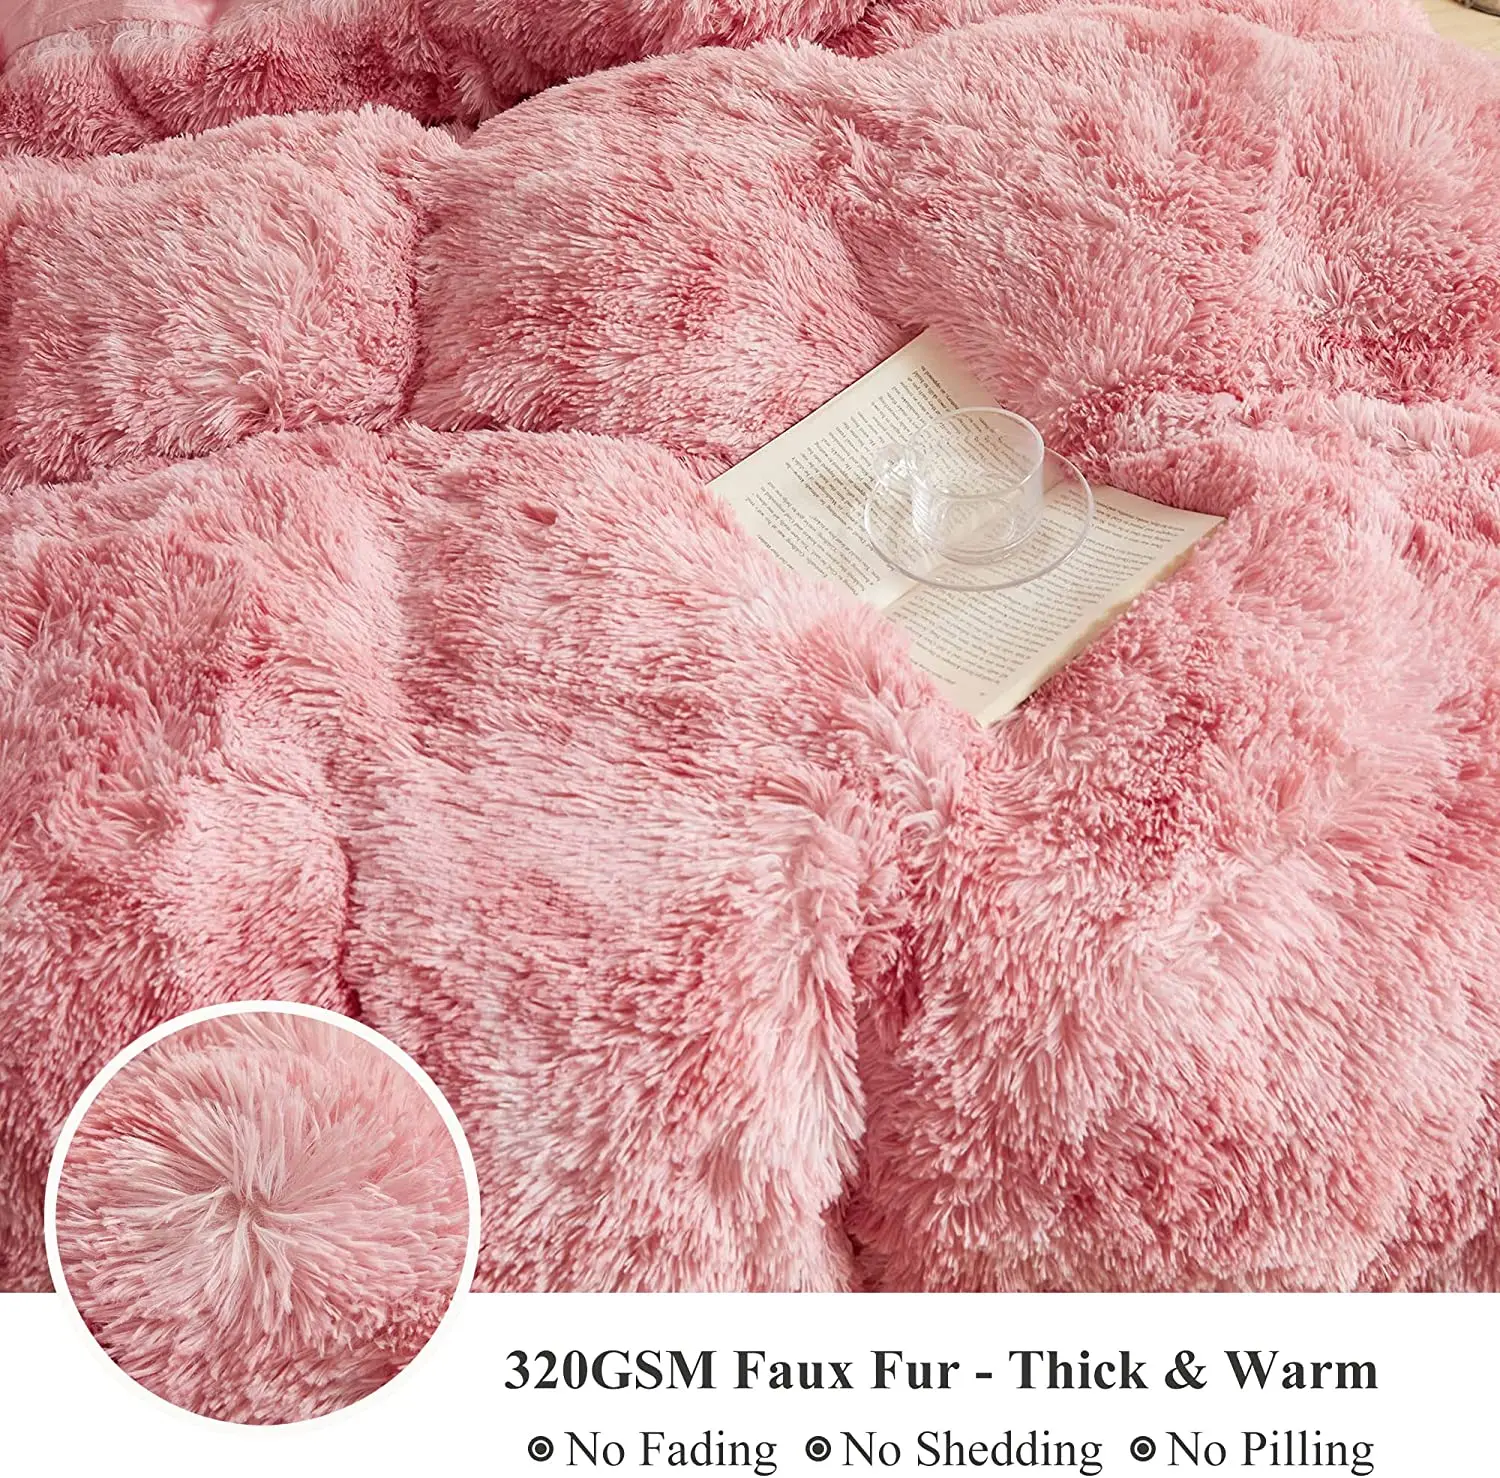 Amazon hot OEM/ODM customized free sample edredones with Zipper Closure duvet down cover sets